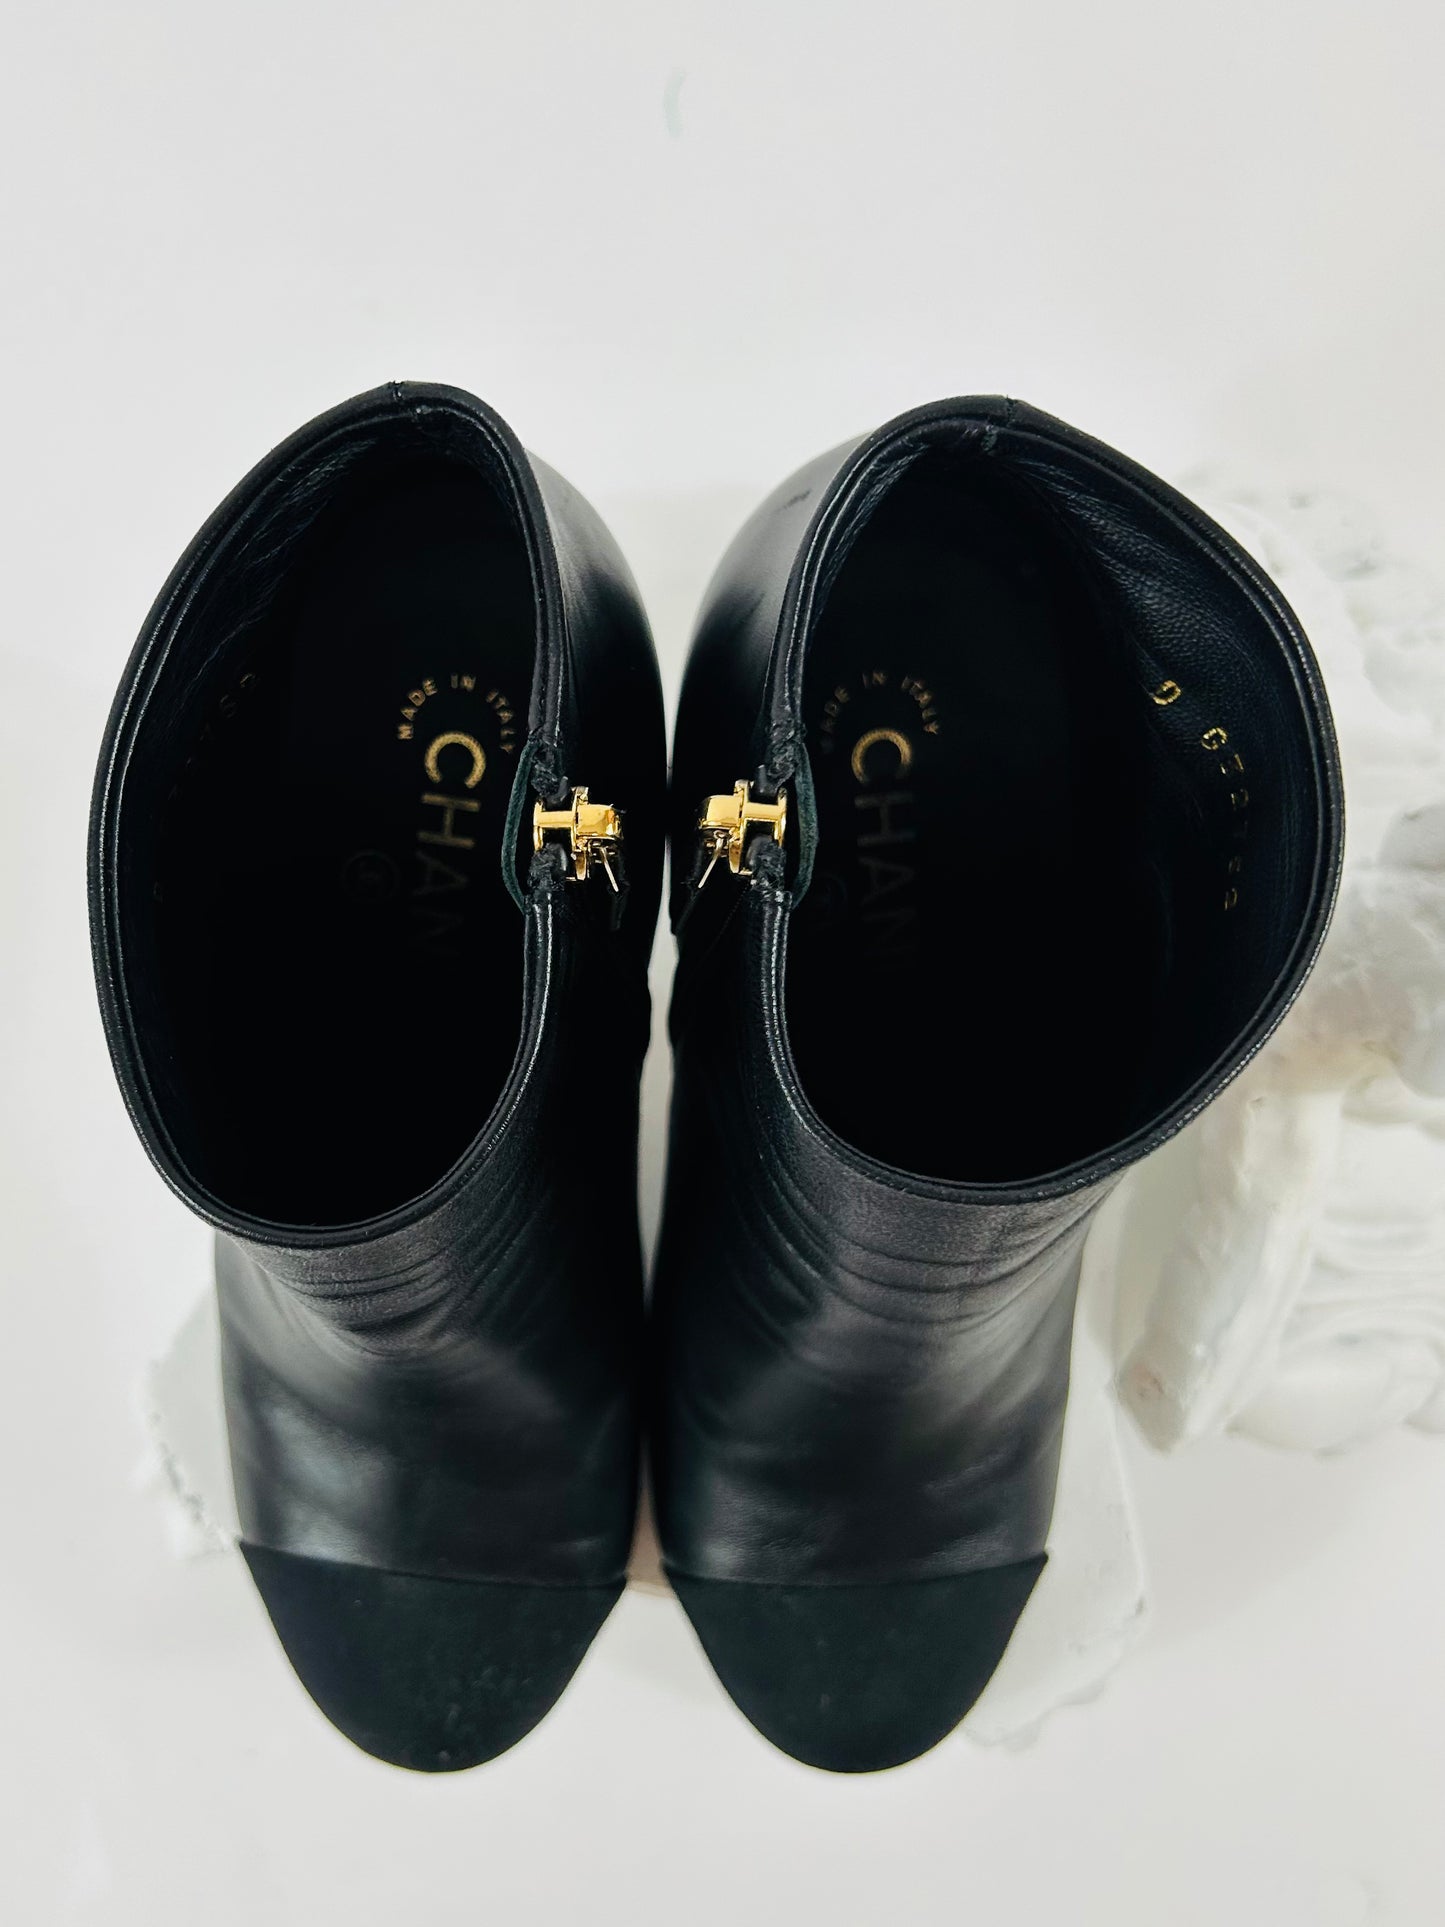 Chanel Black Heel with Pearls